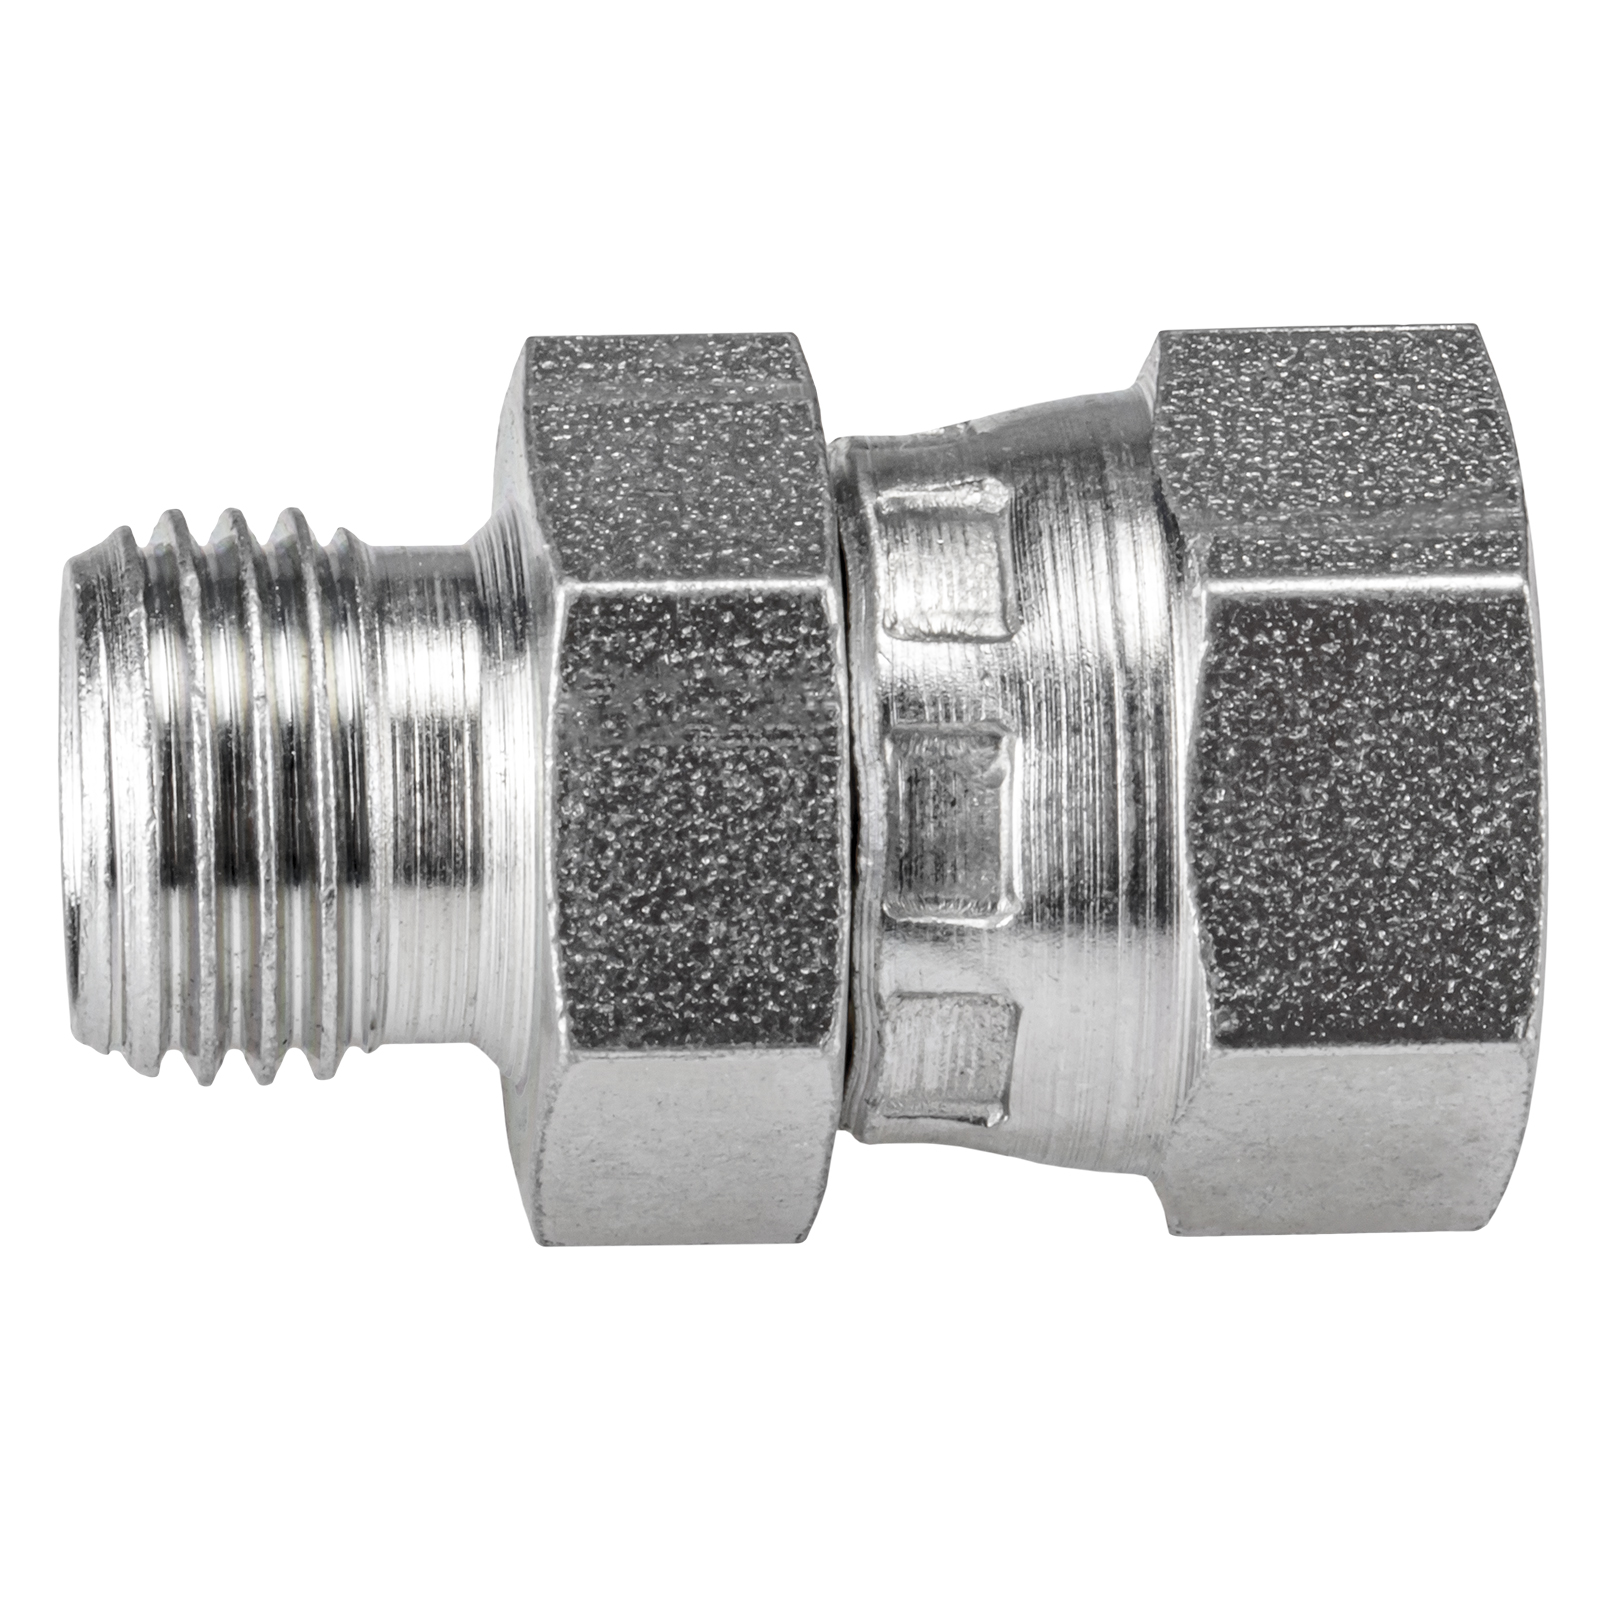 1/4" Fitting, straight screw coupling 